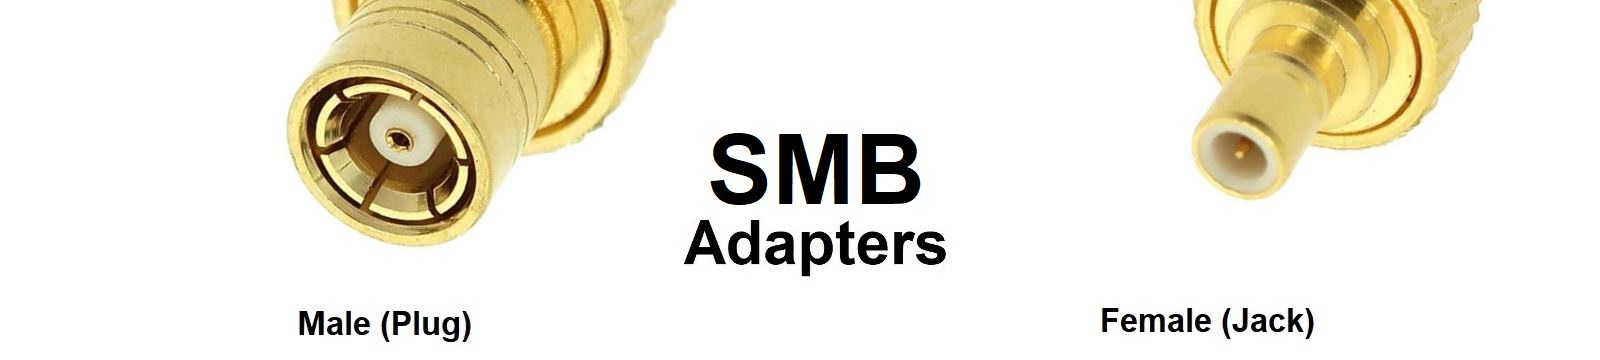 SMB Adapters Category Banner - Max-Gain Systems, Inc.